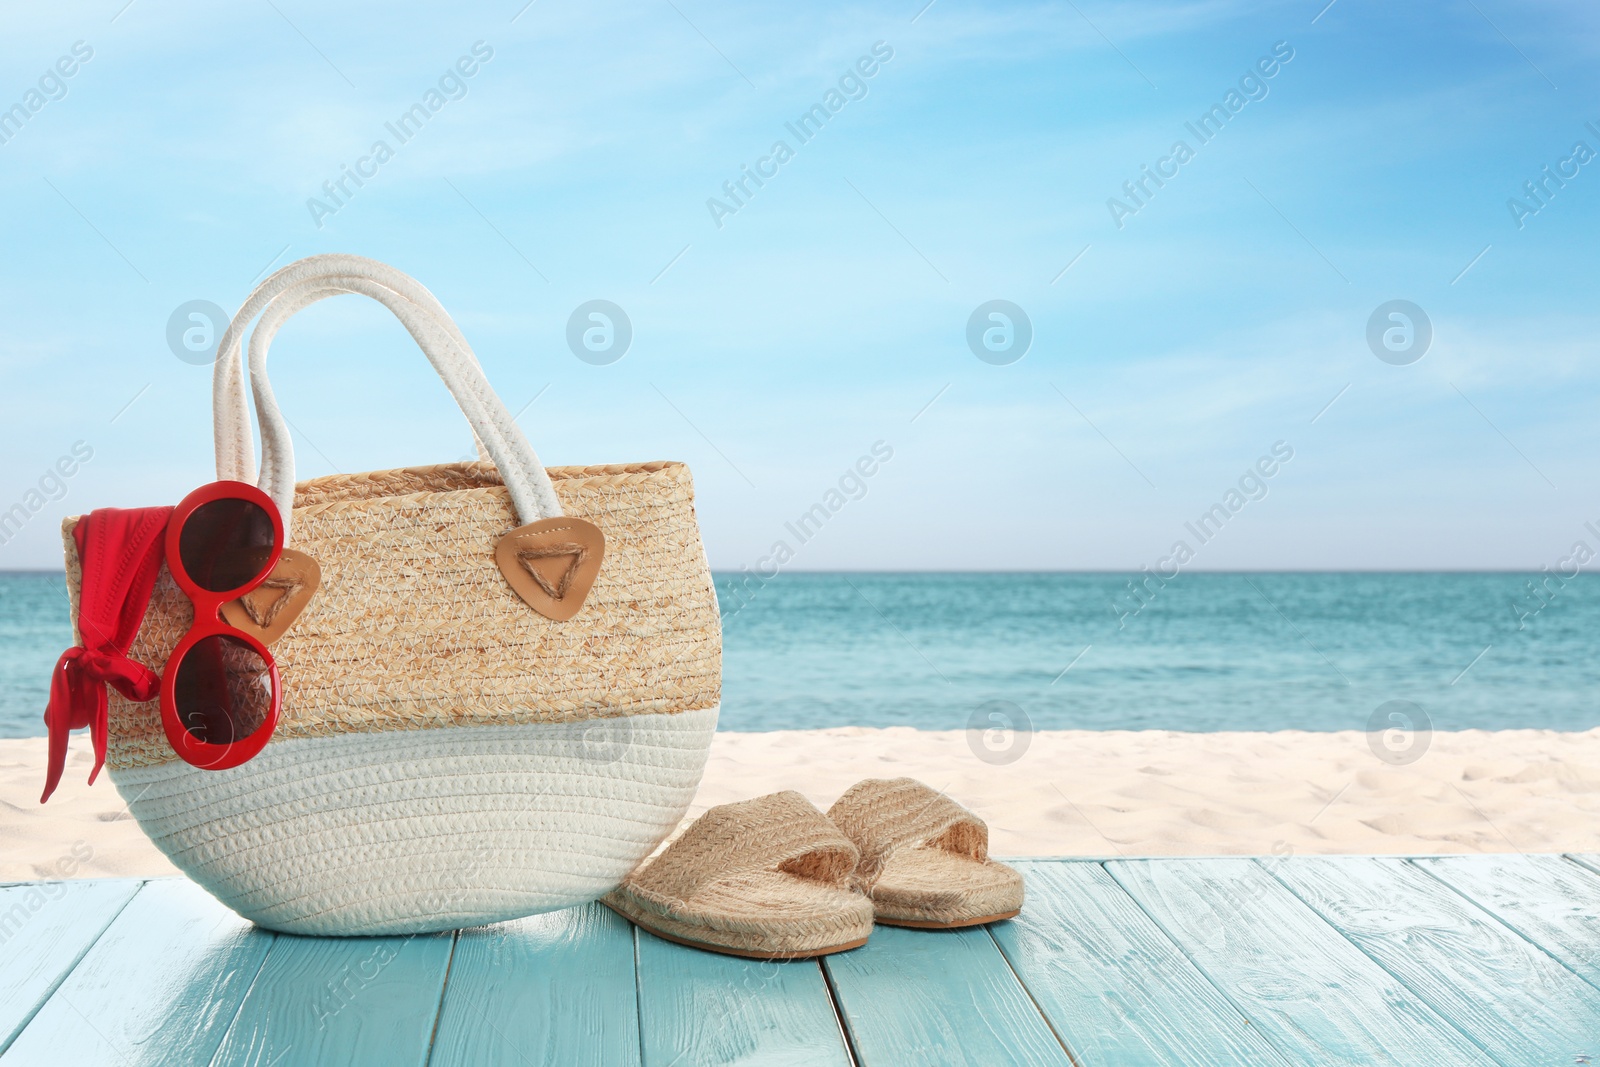 Image of Beach accessories on turquoise wooden surface near ocean, space for text